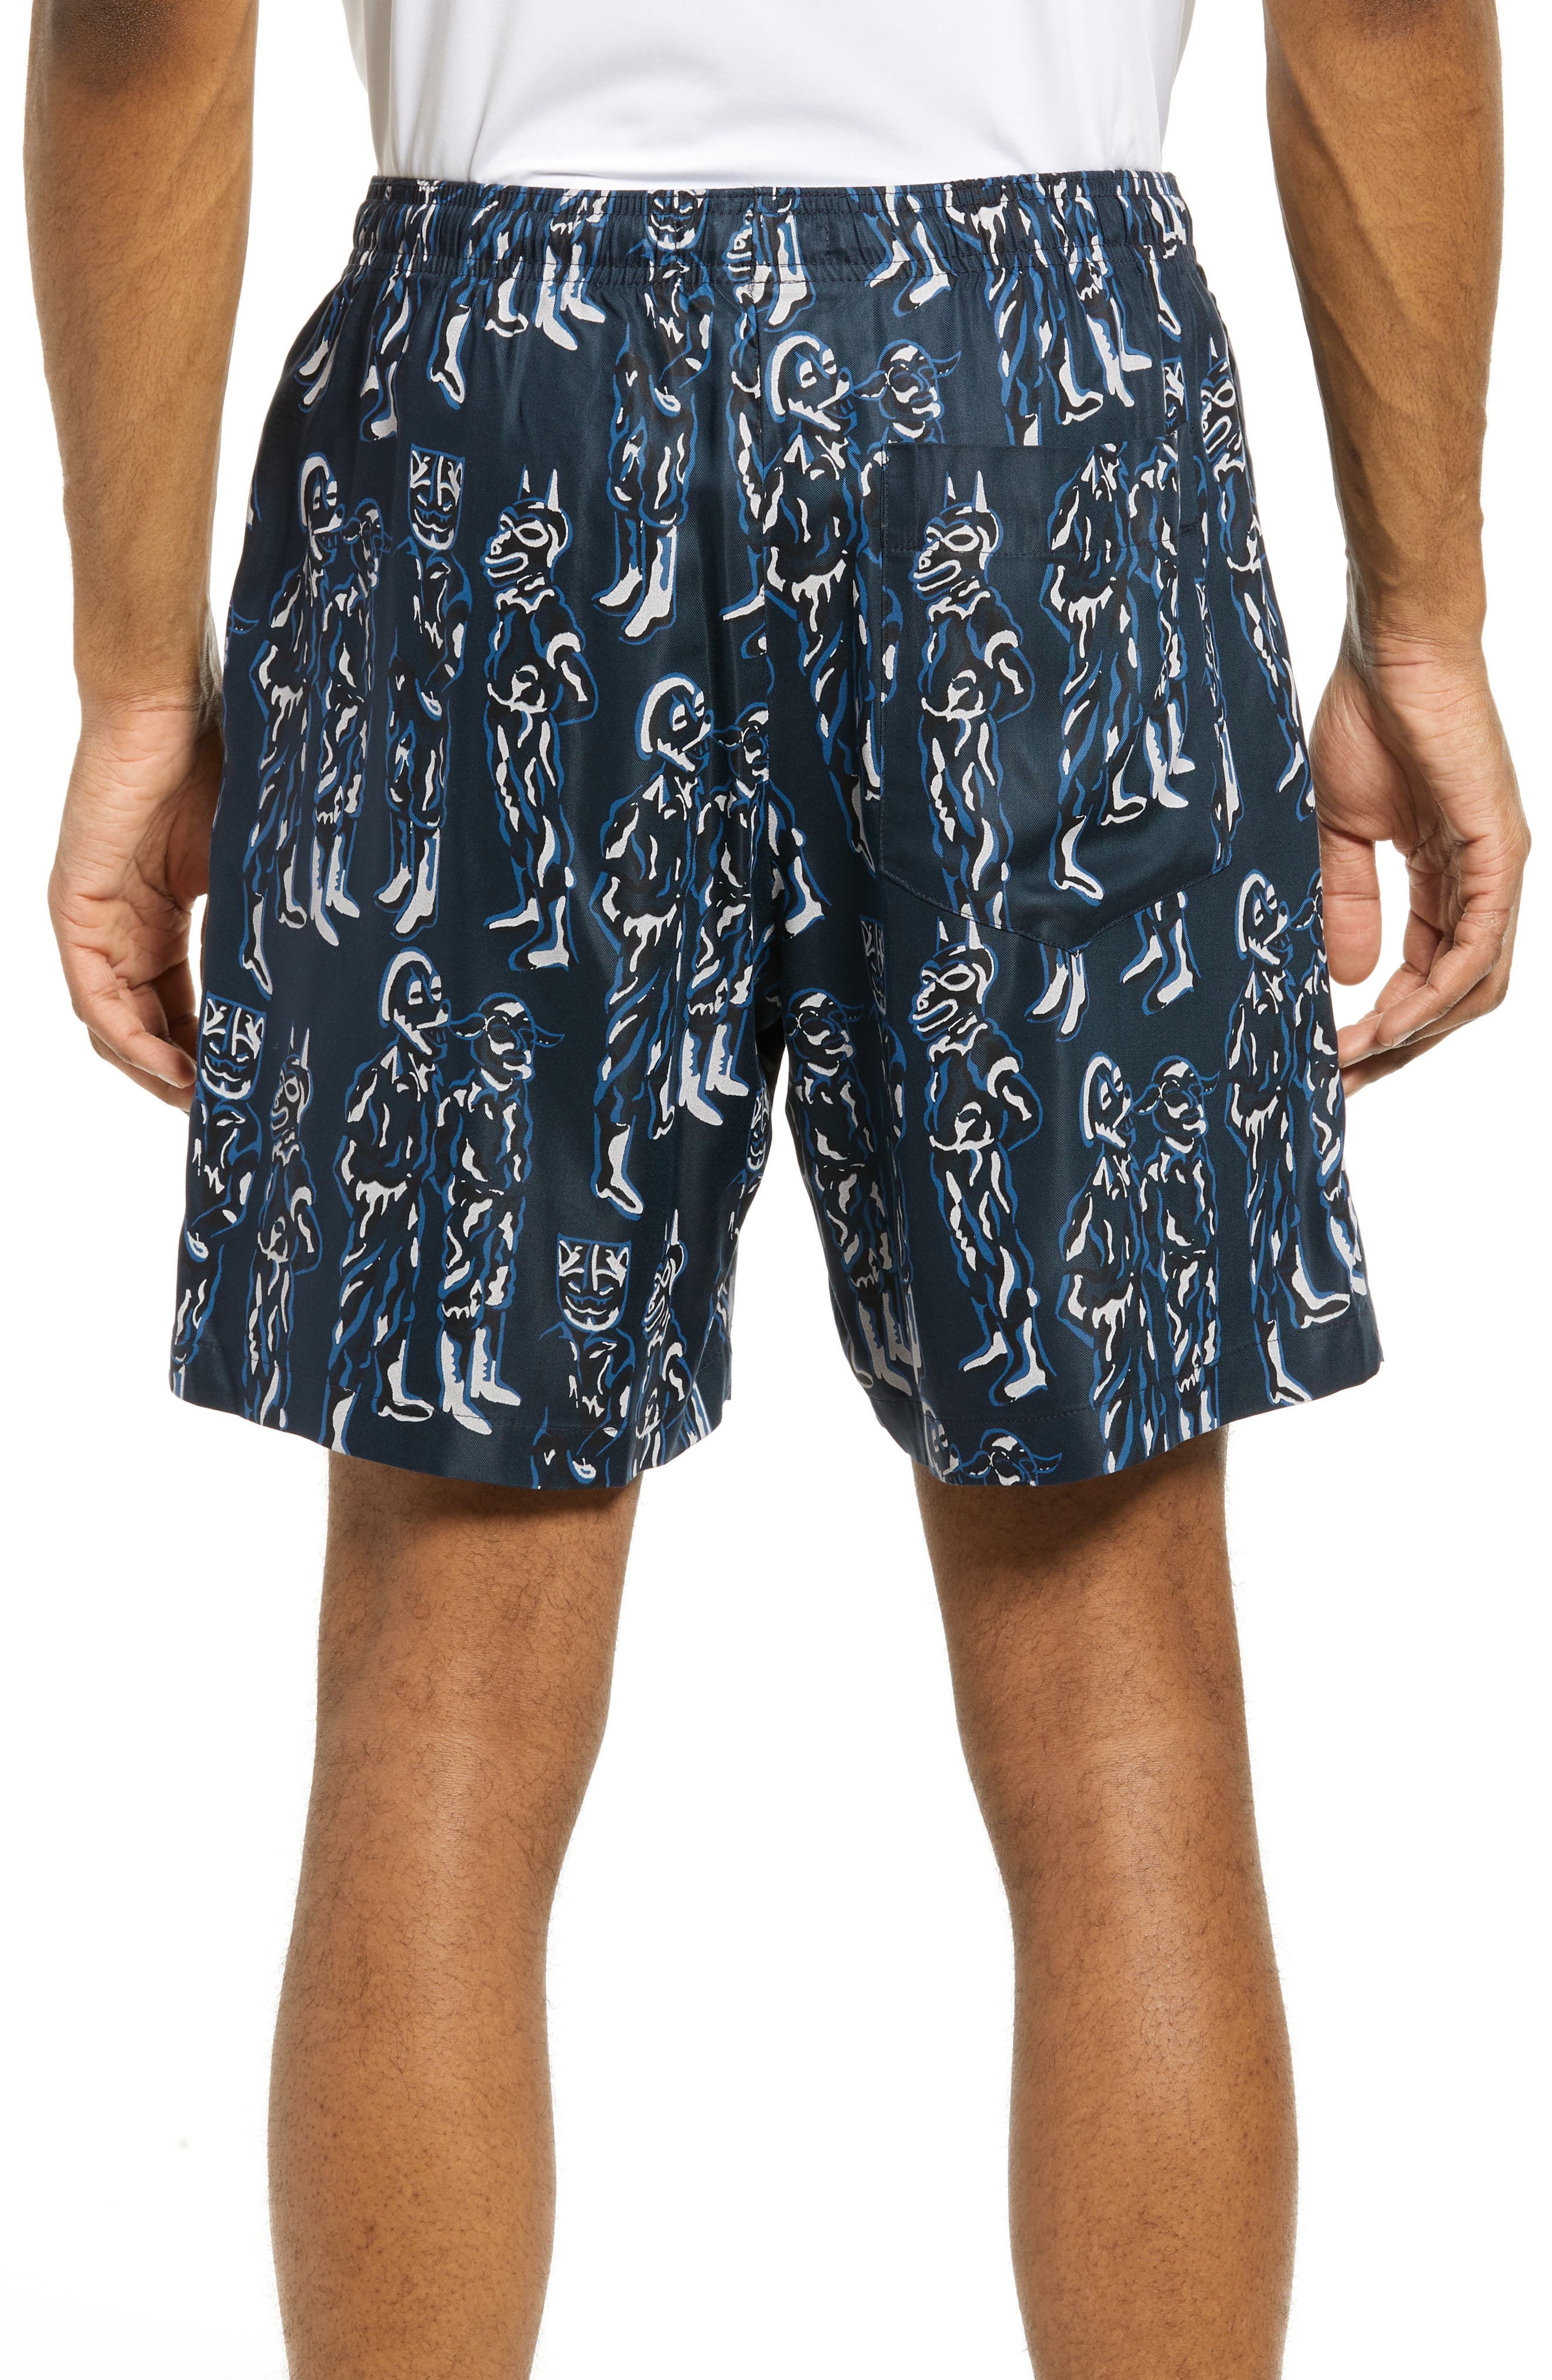 WOOD WOOD Elton Jc Drapy Twill Shorts in Navy Mens Clothing Shorts Casual shorts Blue for Men 